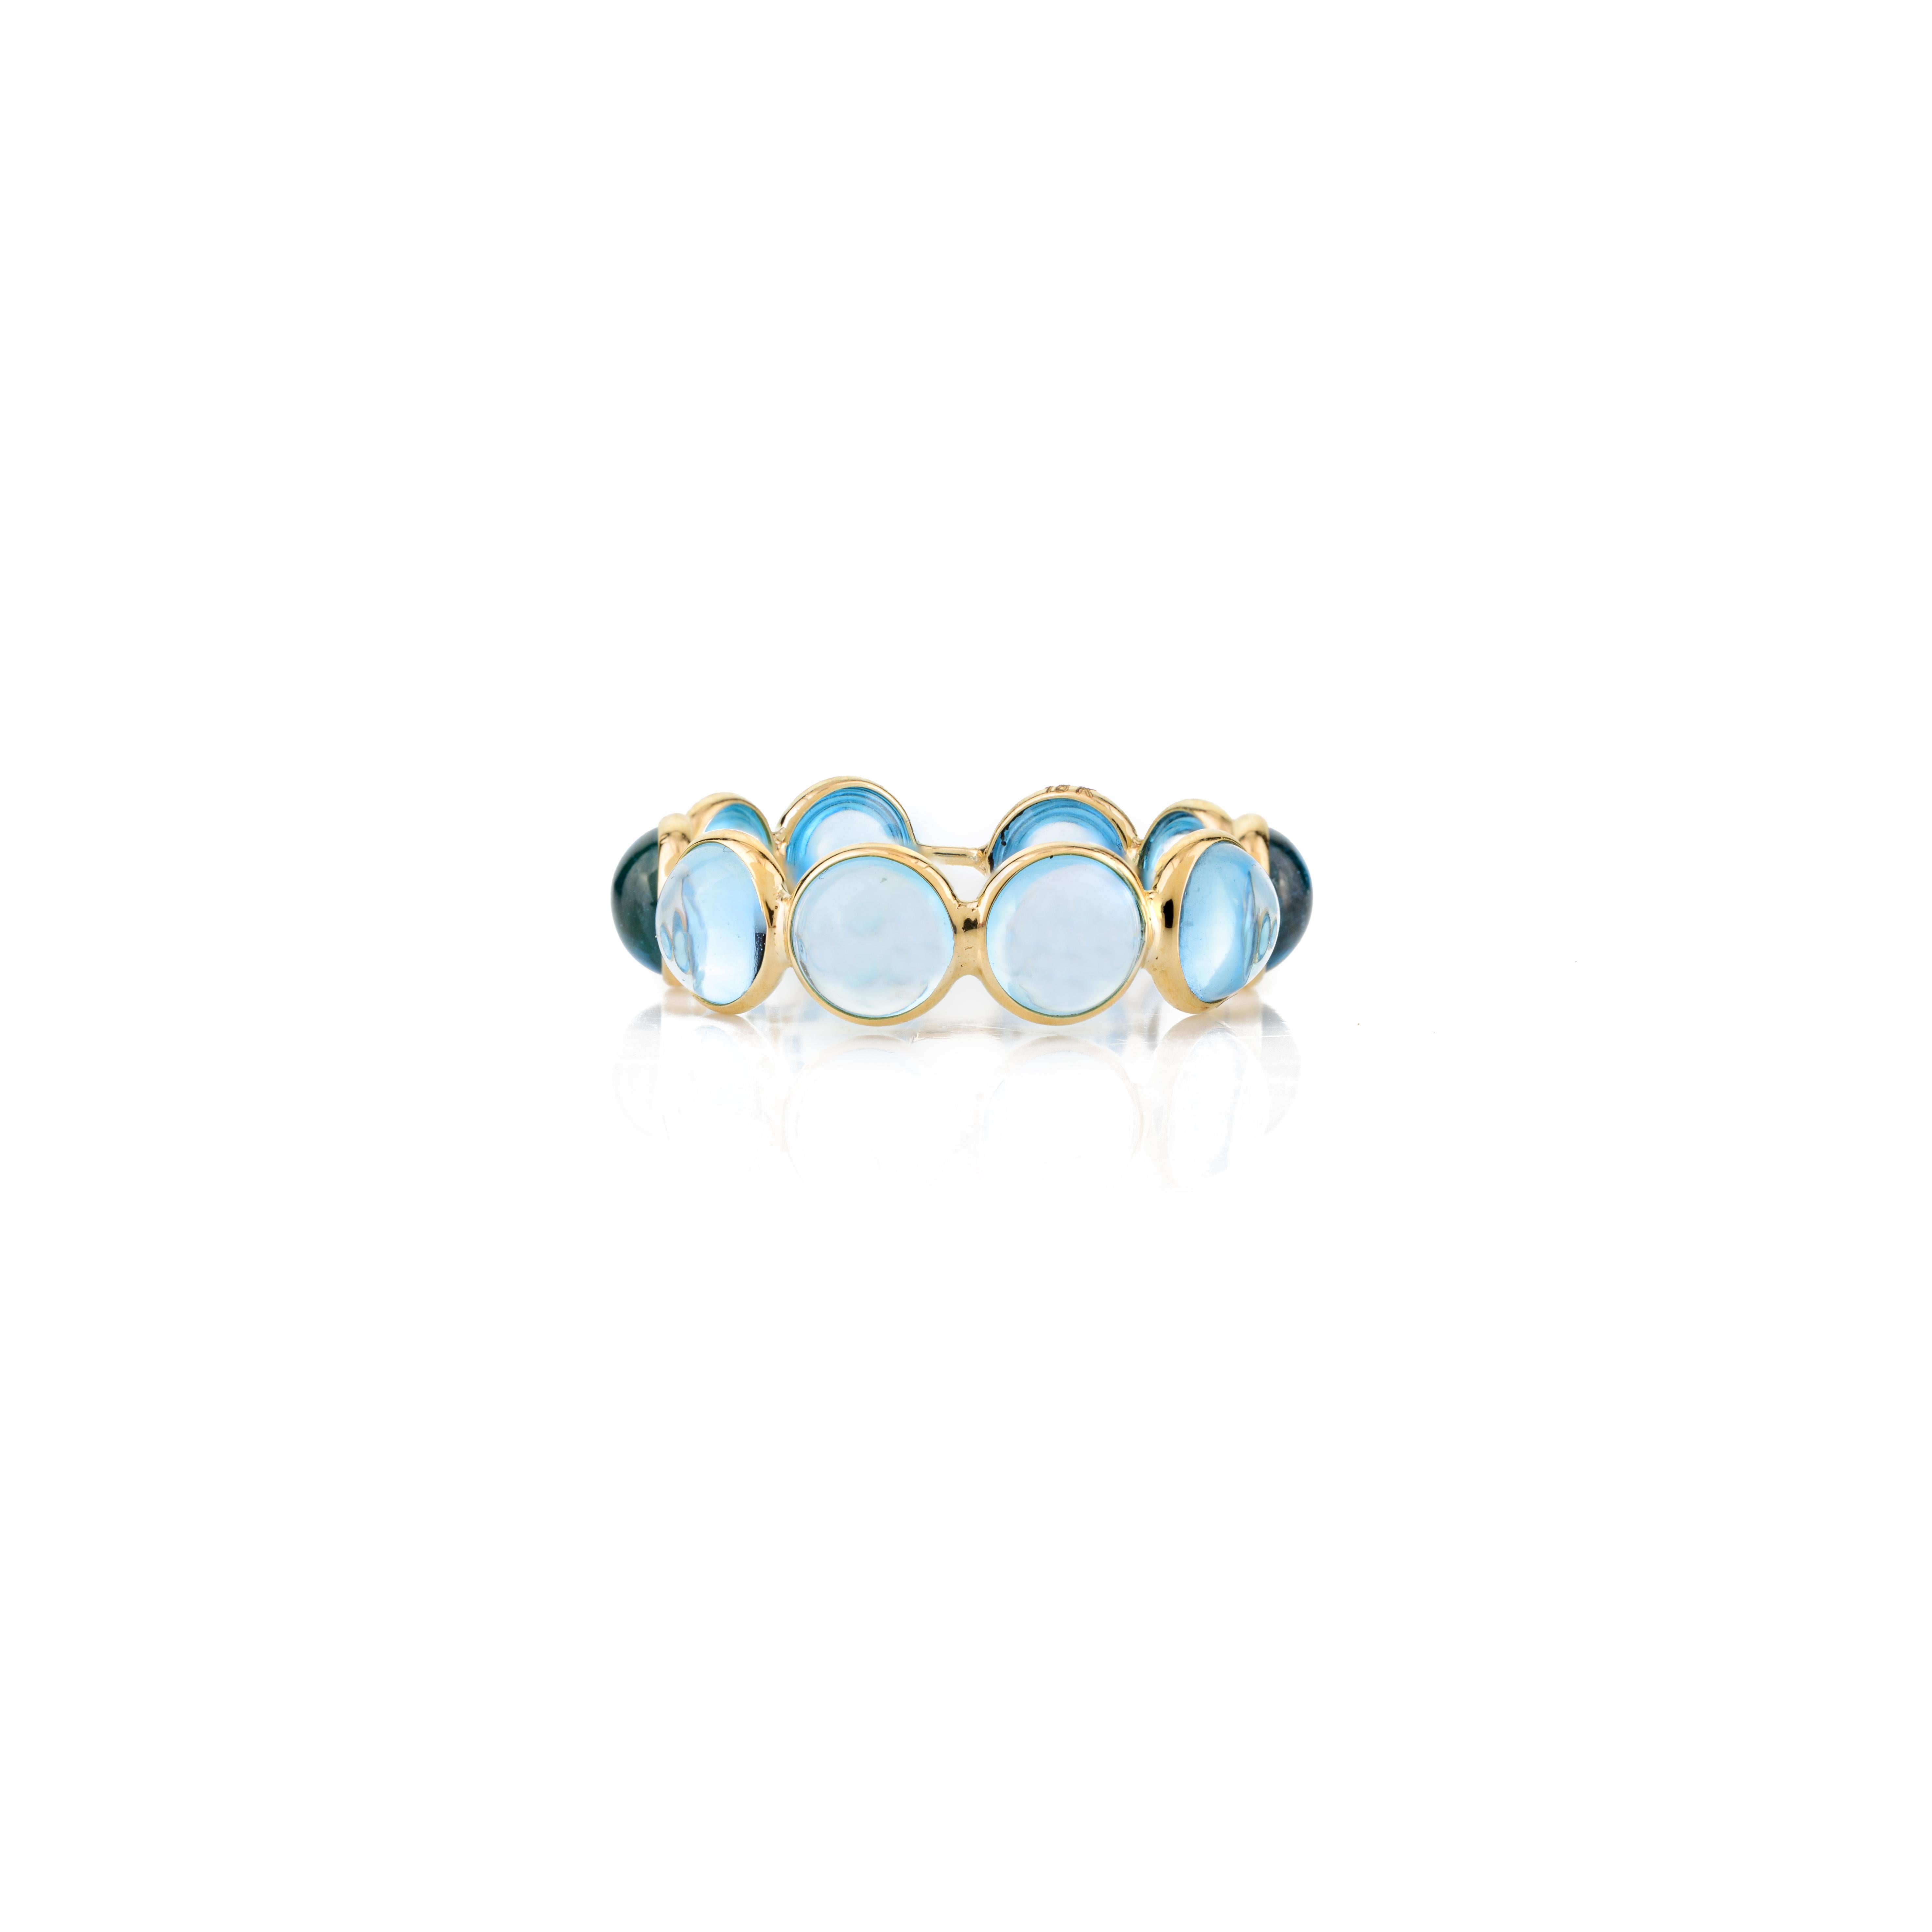 For Sale:  Round Cabochon Blue Topaz Eternity Band Ring Gift in 18k Solid Yellow Gold 3